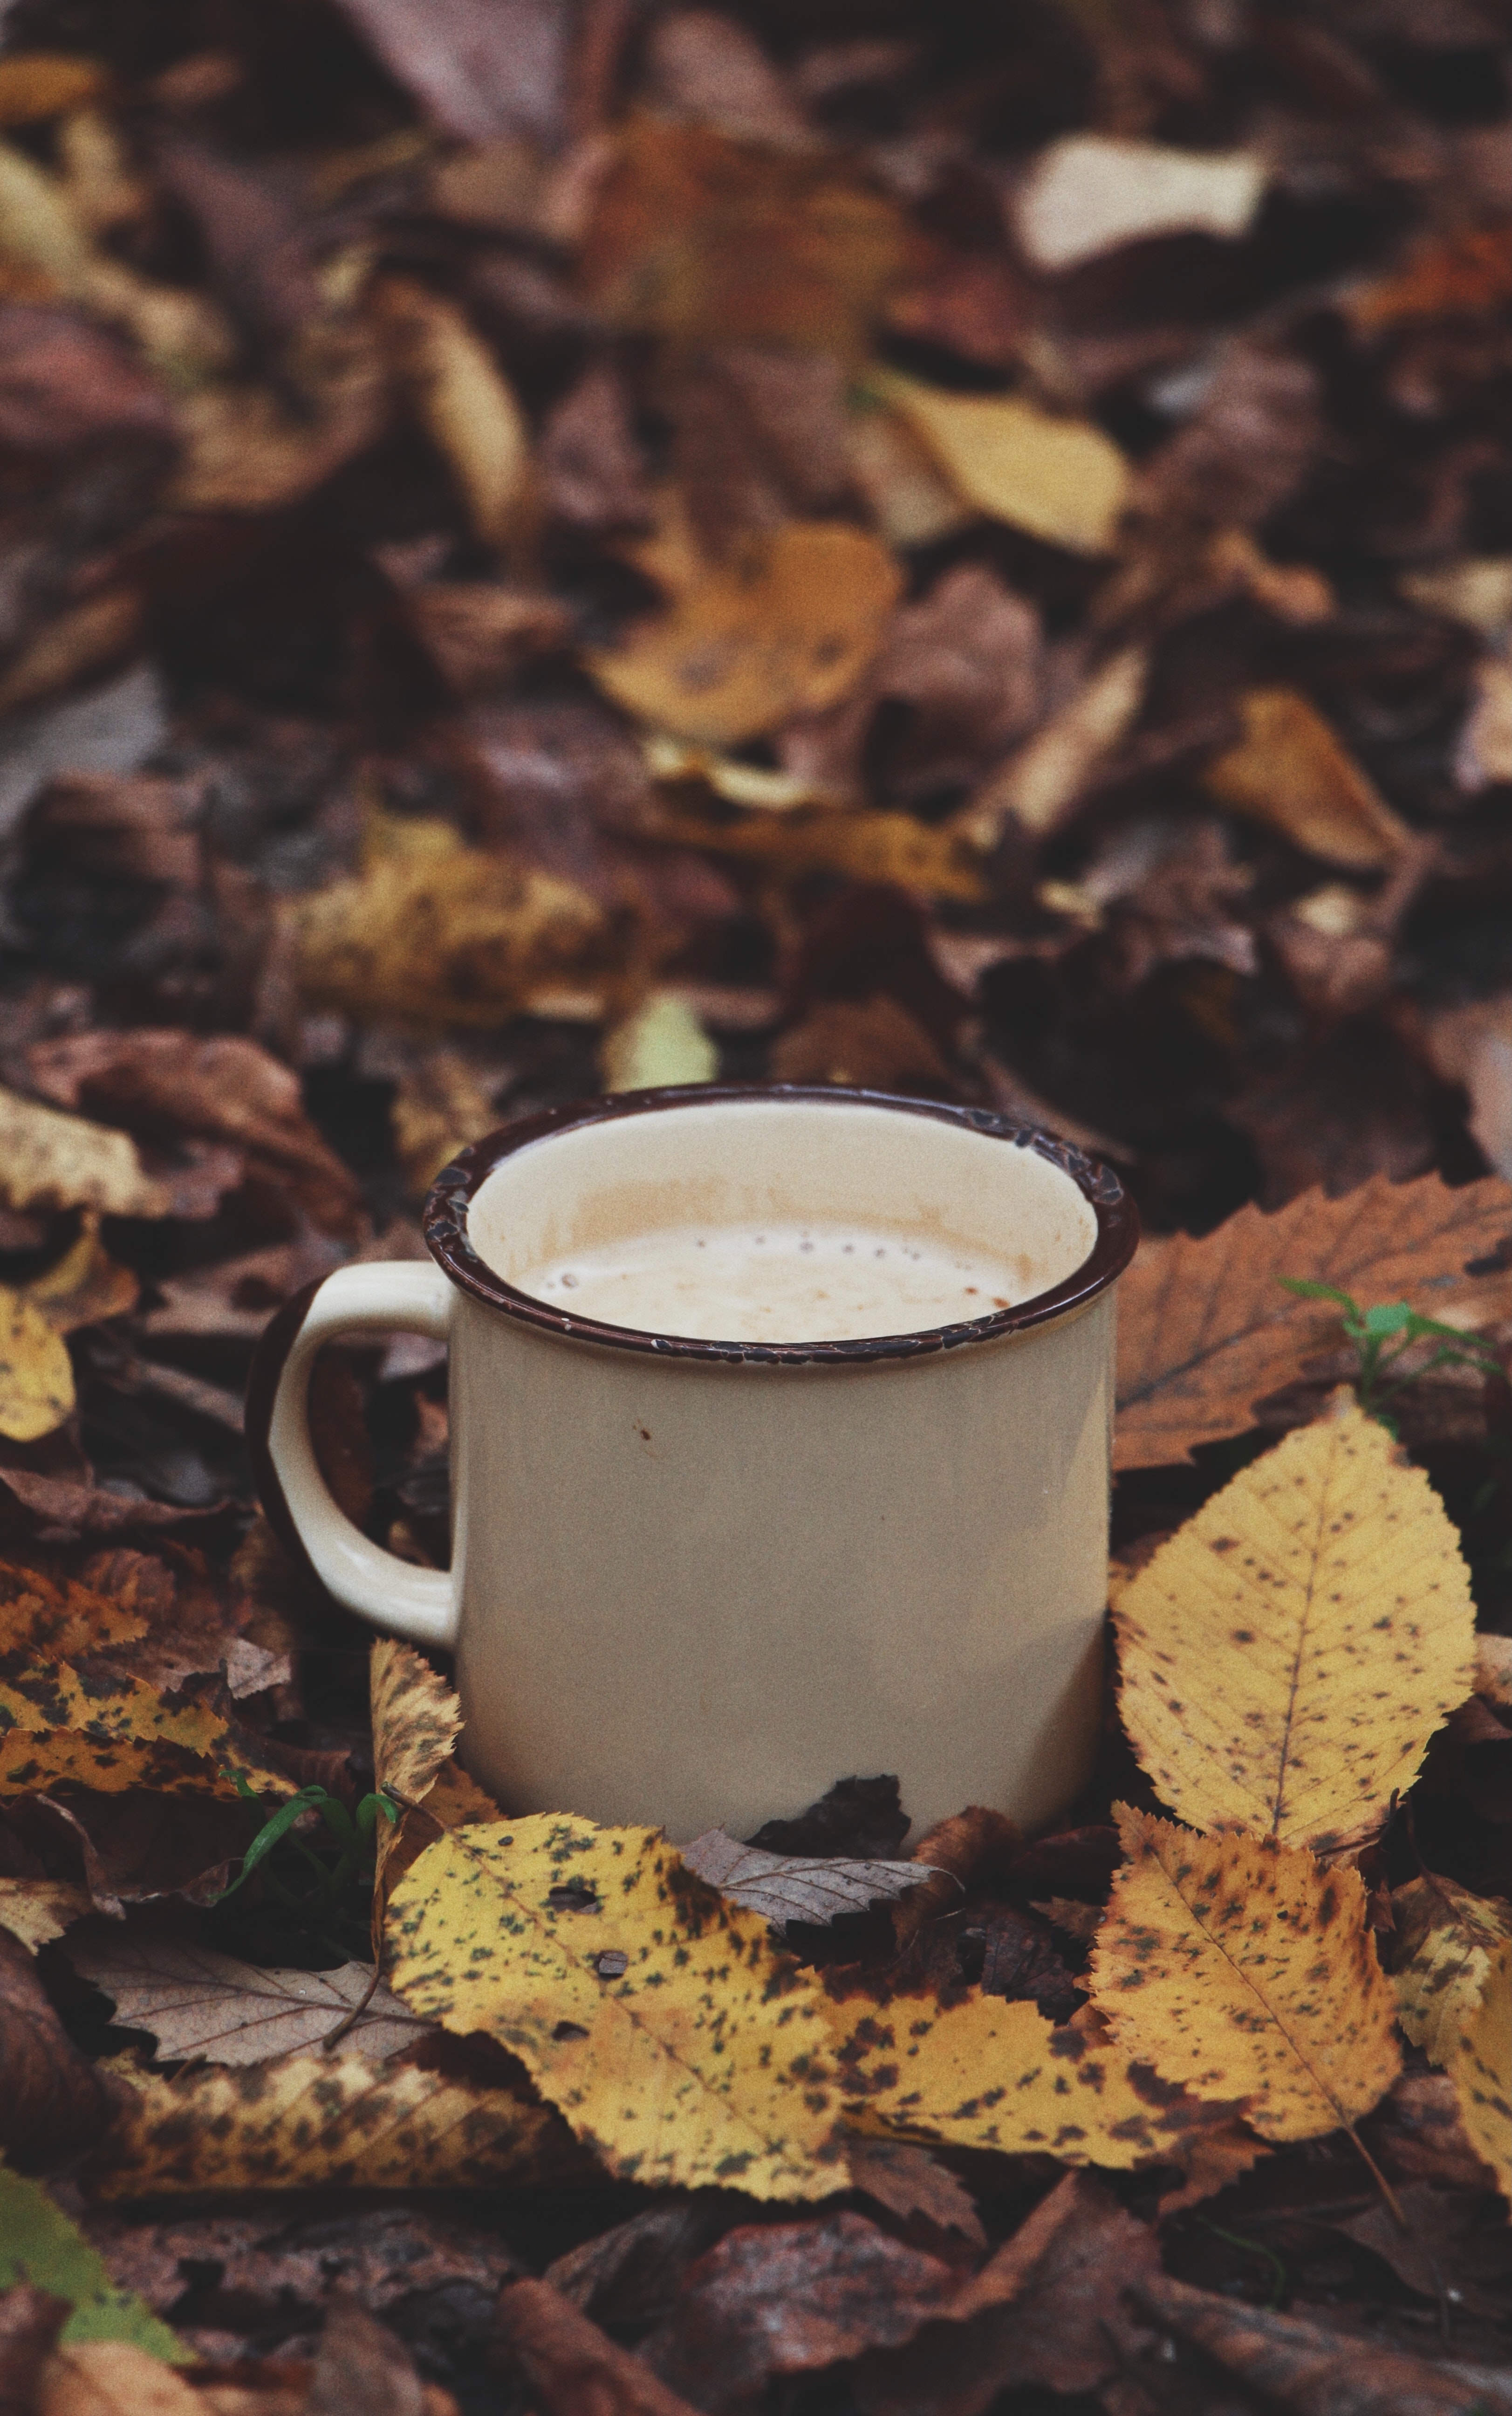 leaves, coffee, miscellanea, miscellaneous, cup, drink, beverage, mug